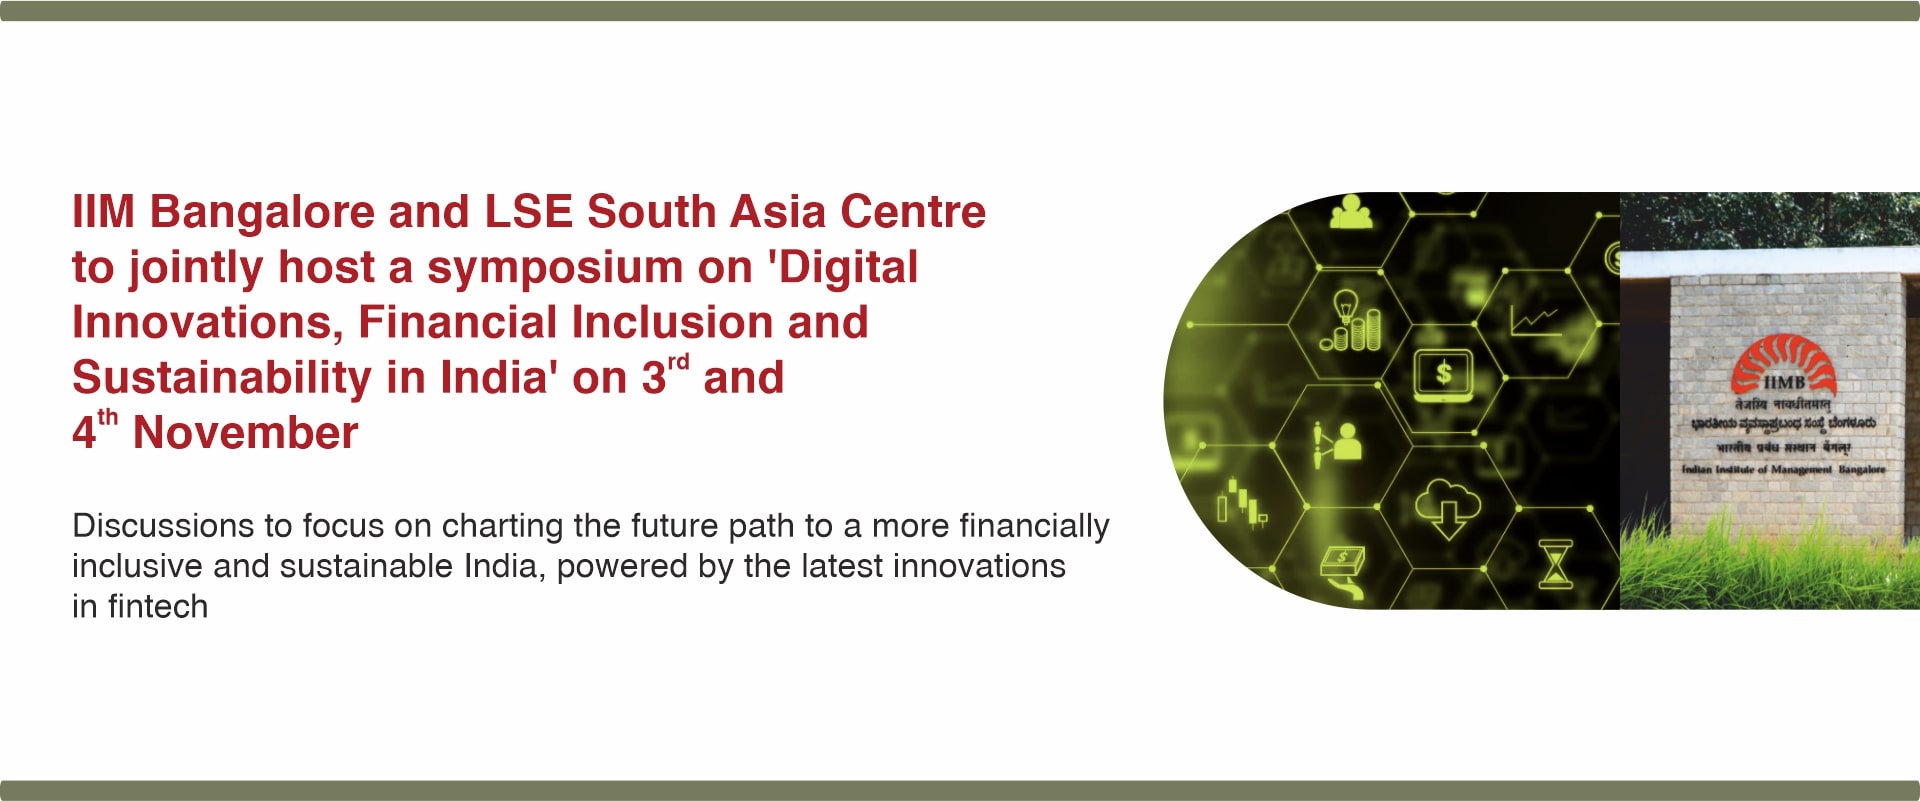 Digital Innovations, Financial Inclusion and Sustainability in India